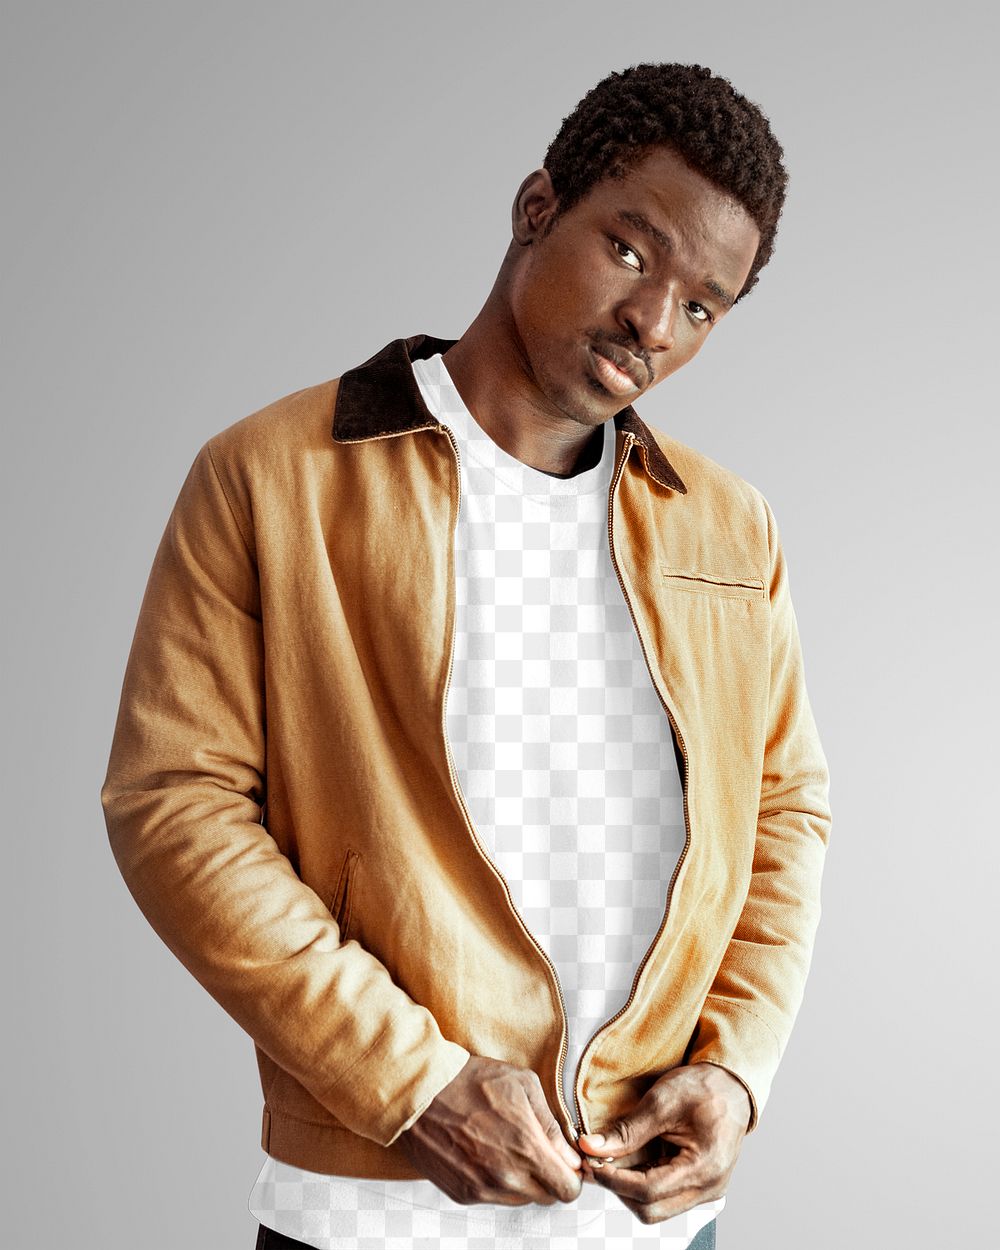 Men's beige jacket png with sweater mockup on gray